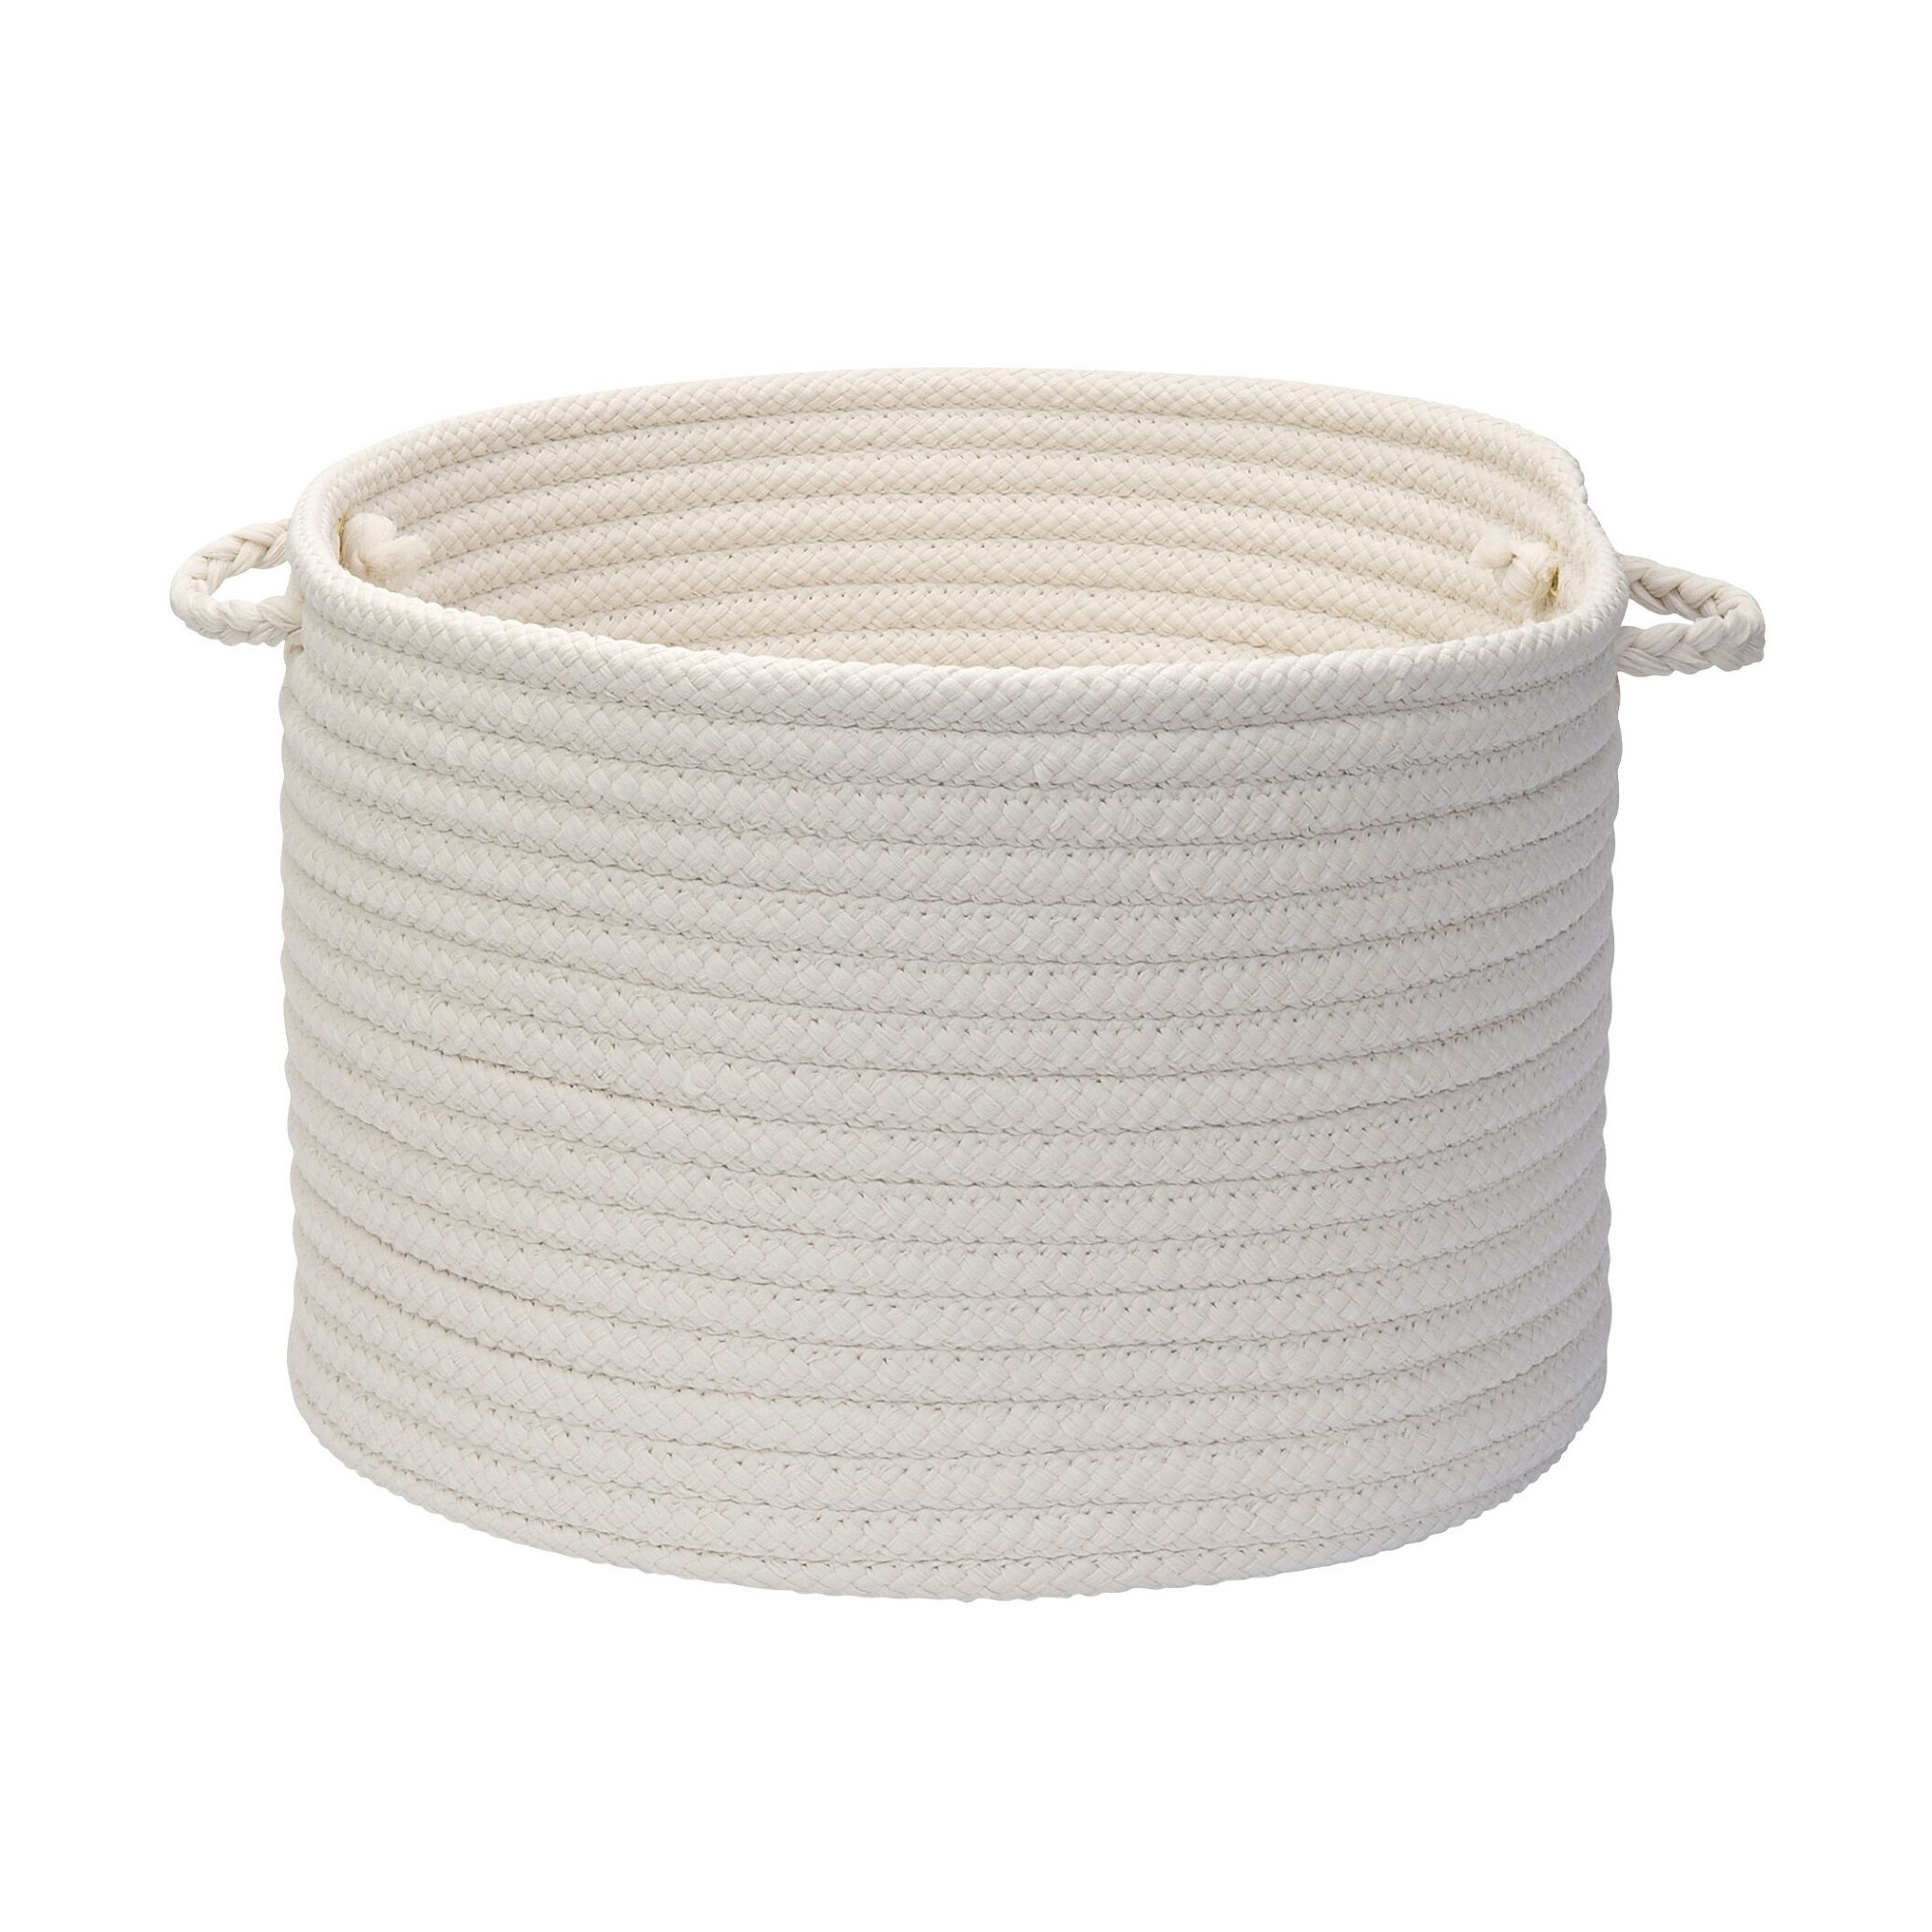 Colonial Mills 24" White Handcrafted Round Braided Basket - image 1 of 6